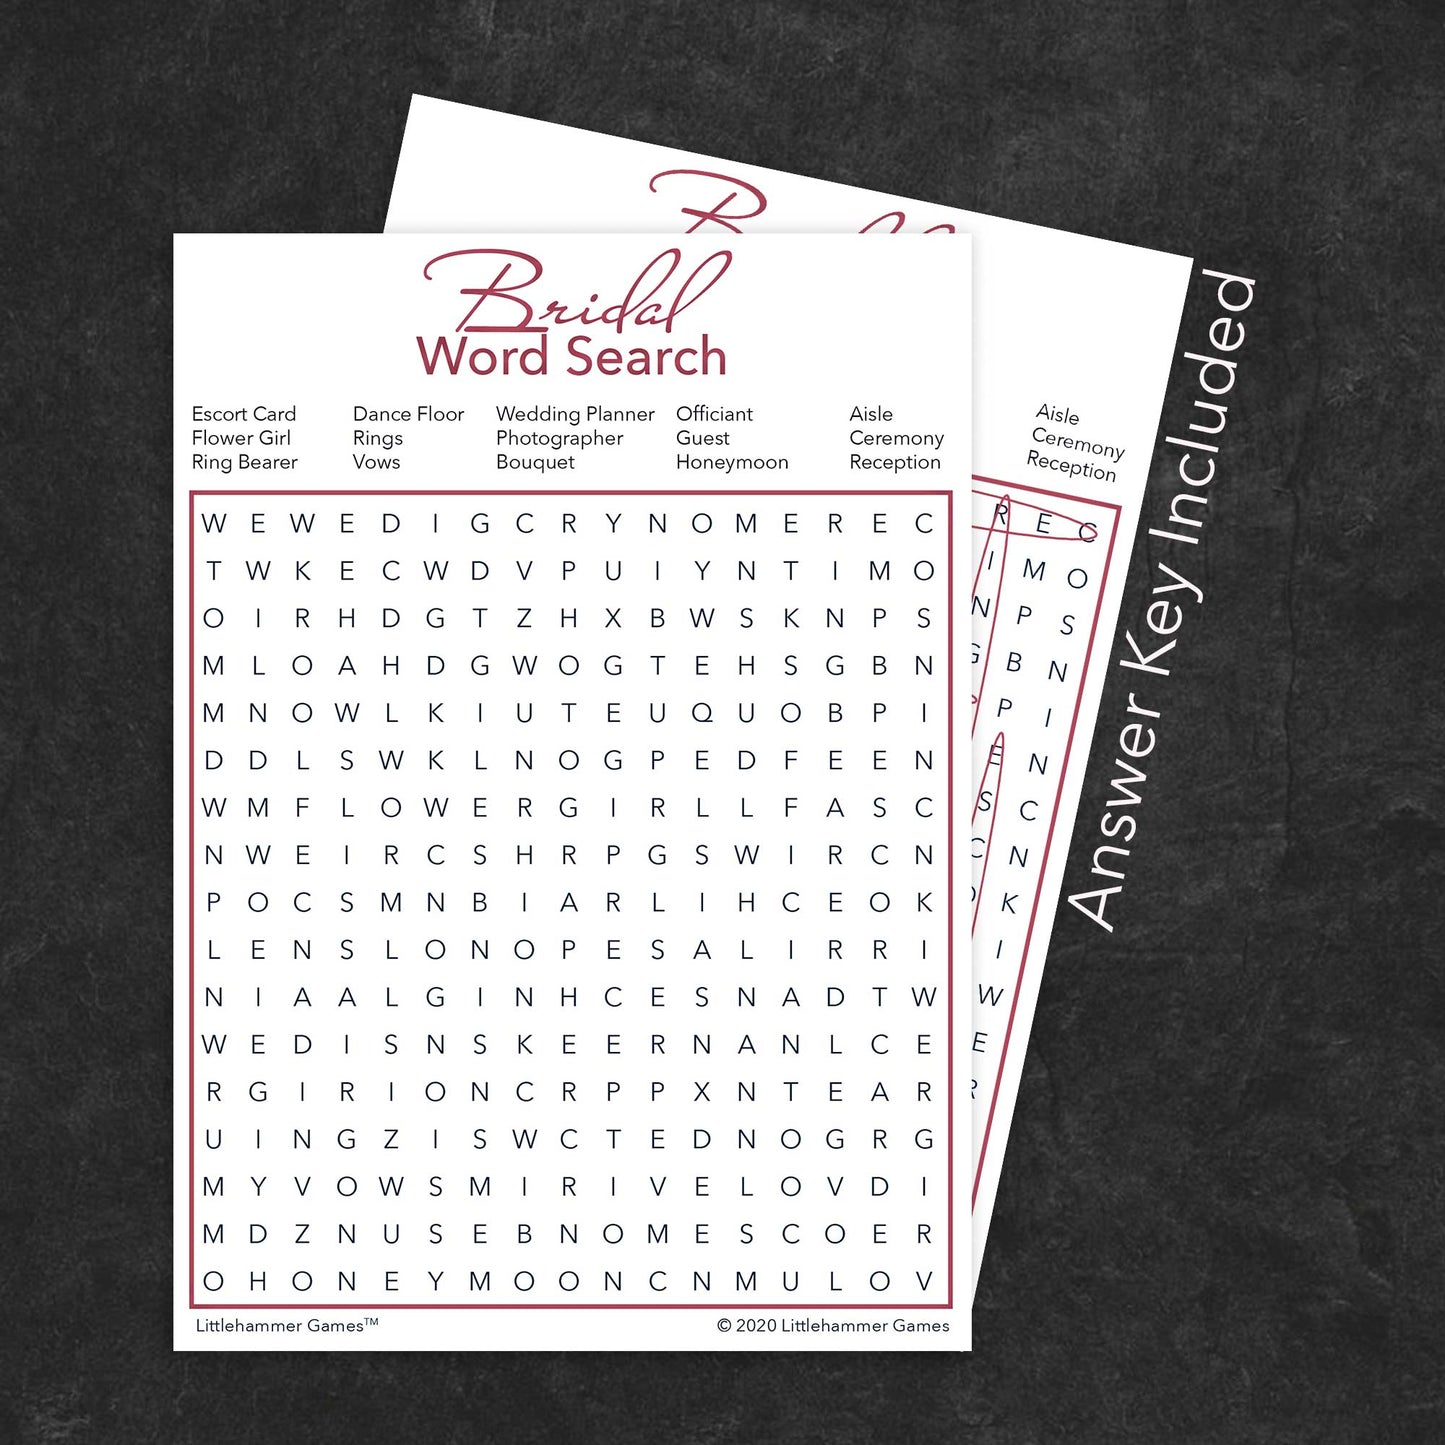 Bridal Word Search game card with a rose gold and white background with answer card tucked behind it on a slate background with white text that says "Answer Key Included"